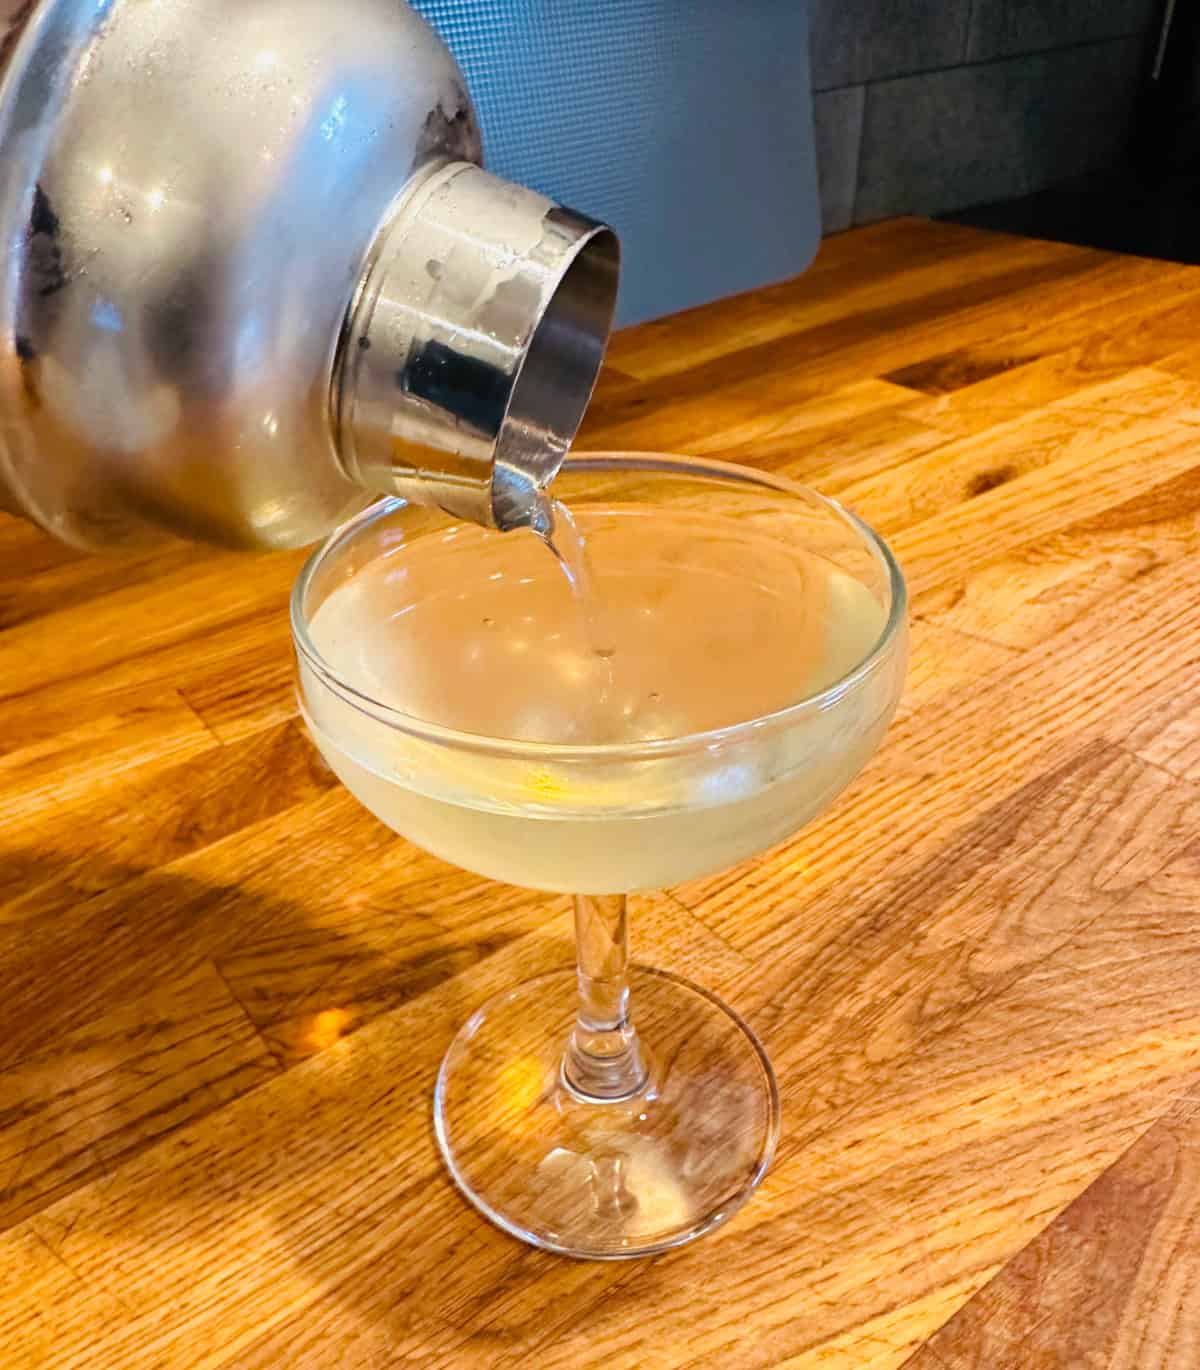 Elderflower martini being poured from a frosty cocktail shaker into a small coupe glass.